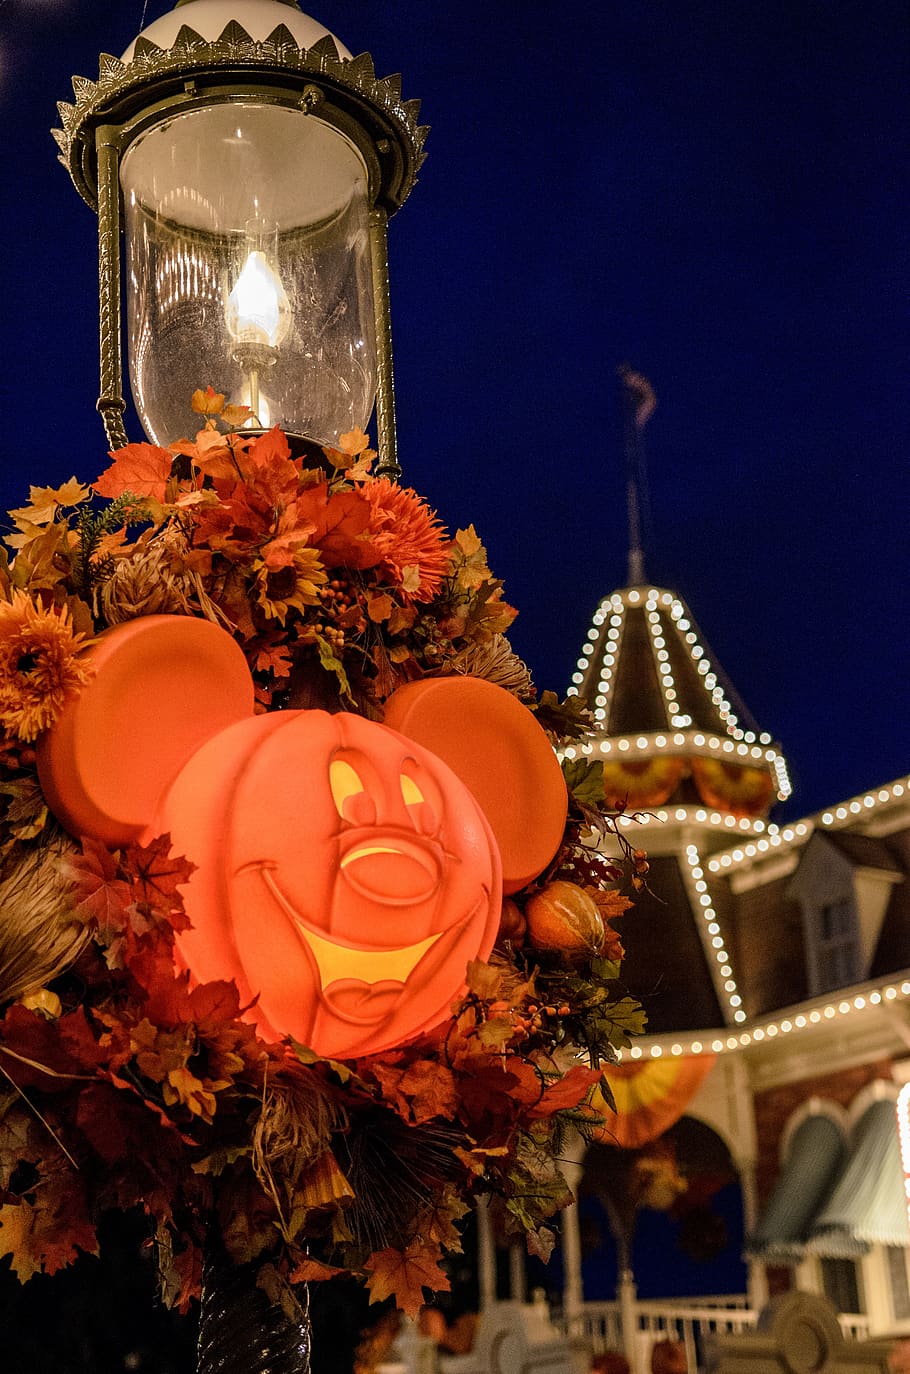 Disney Shares New Halloween Wallpaper For Your Computer Or Phone   MickeyBlogcom